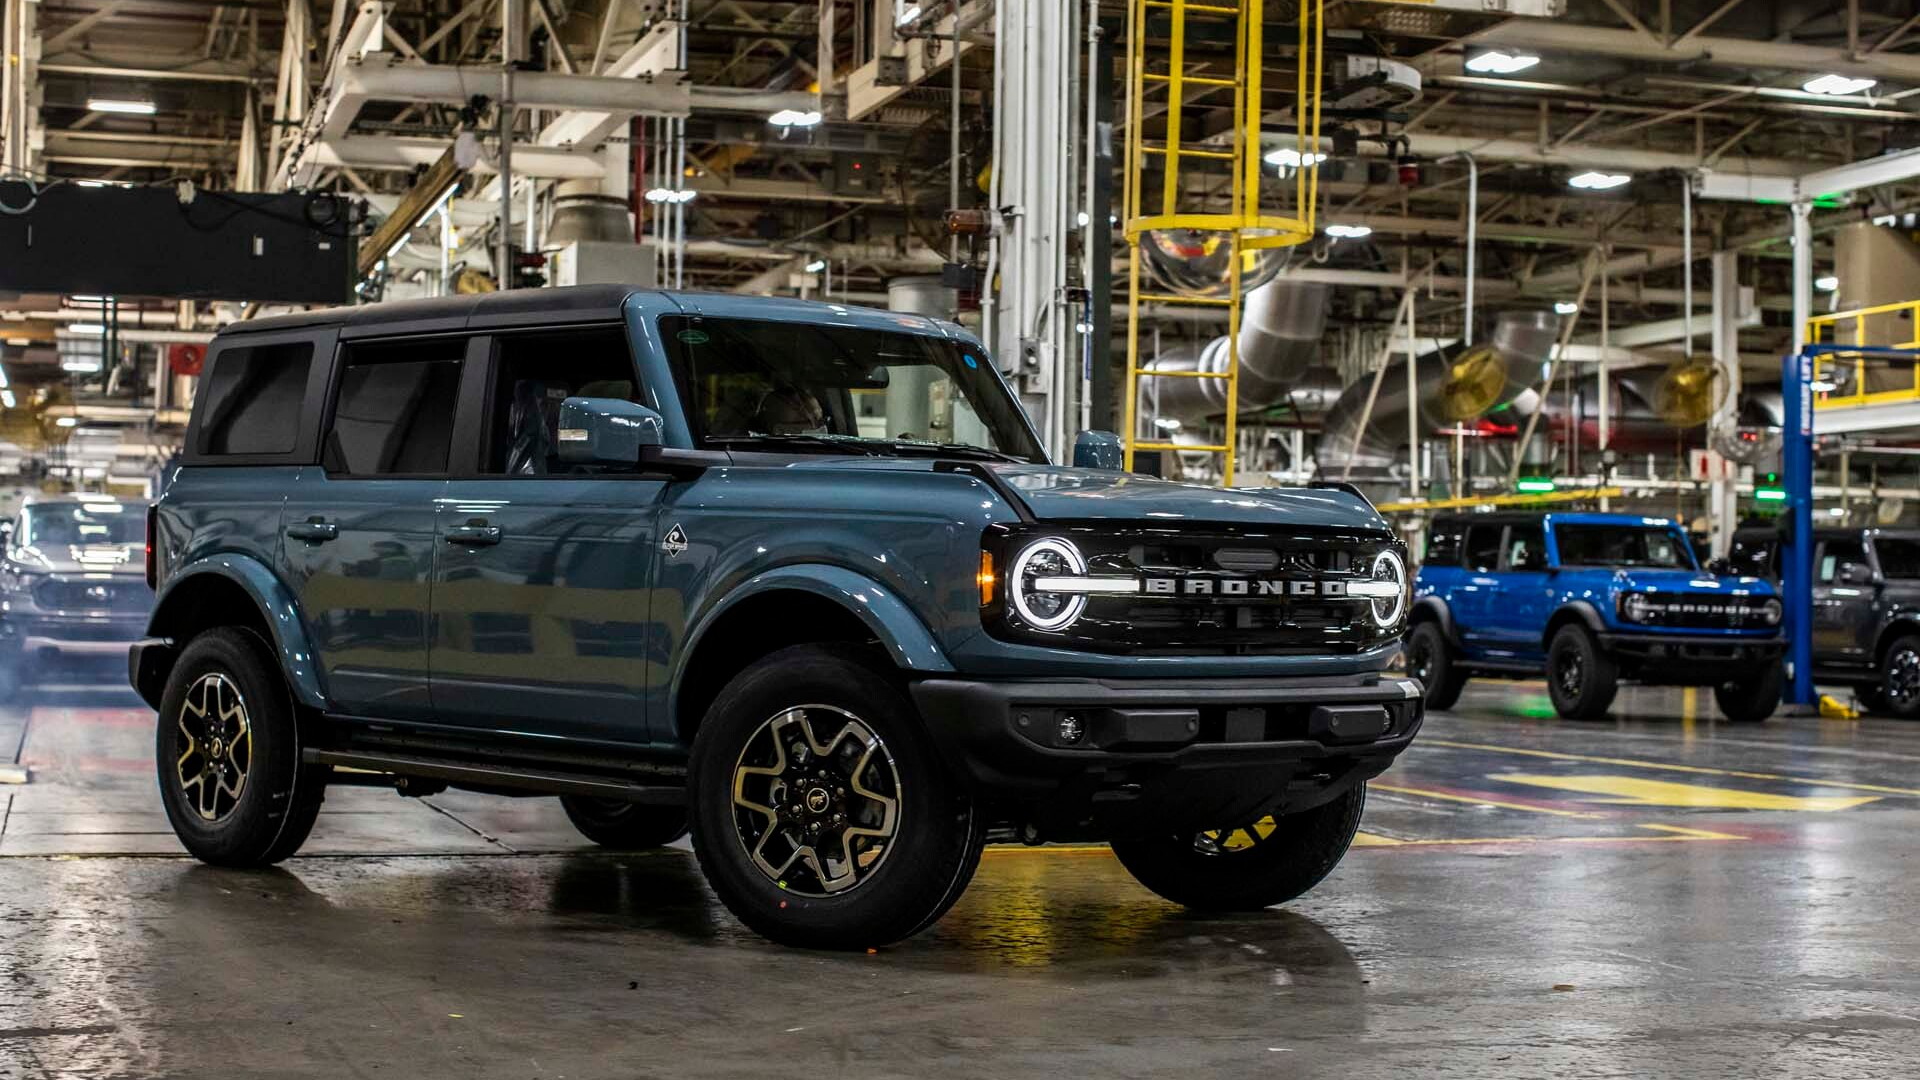 2021 Ford Bronco Production Is Underway